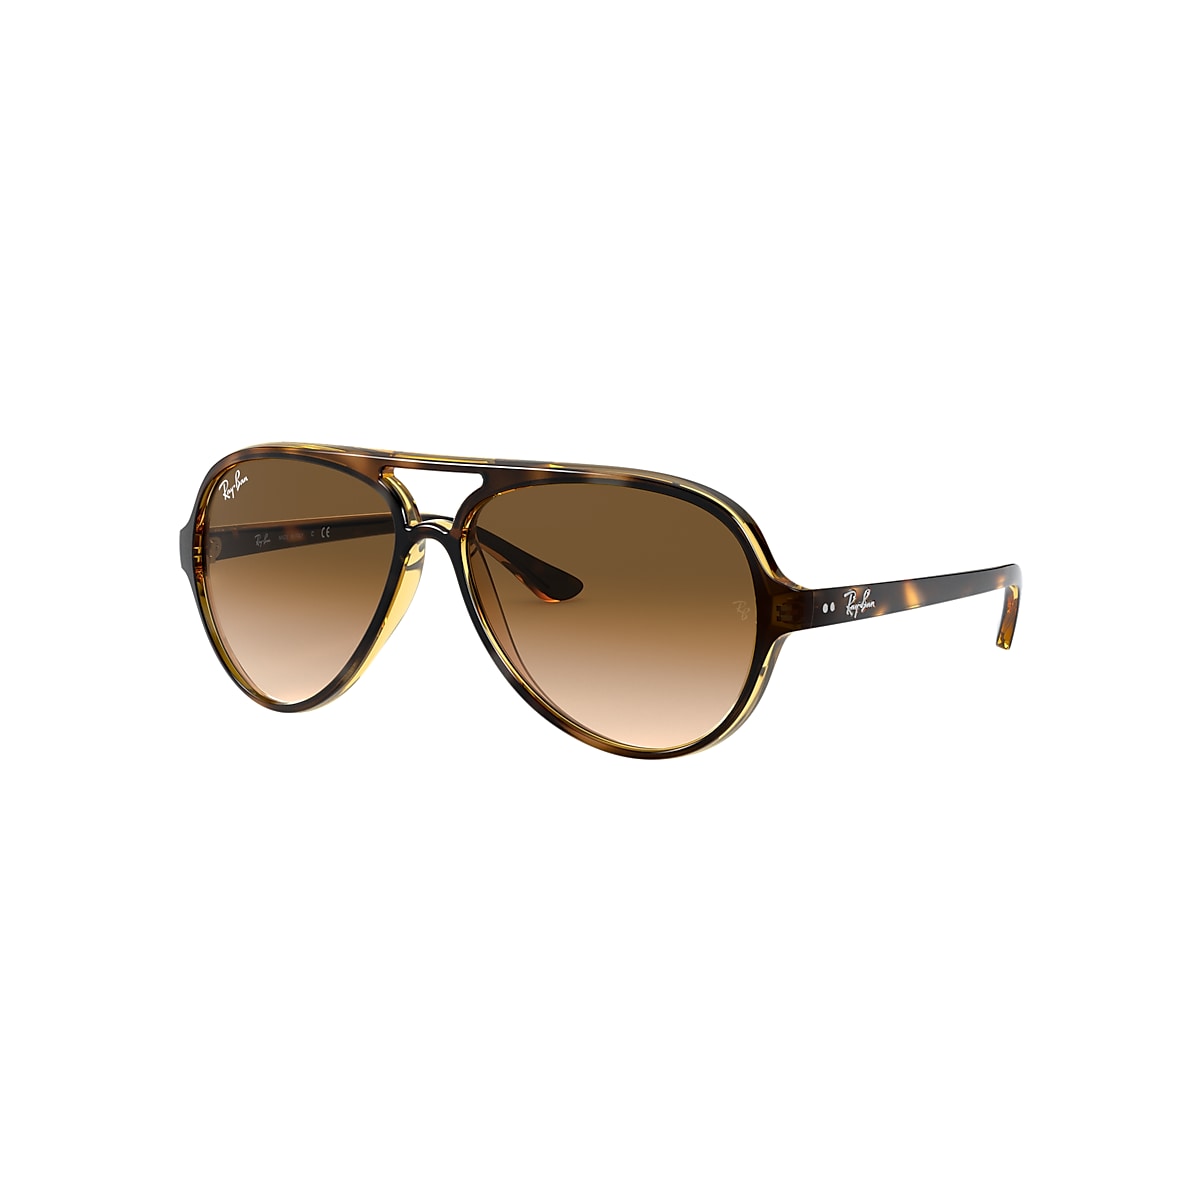 Begrip Rot Baars CATS 5000 CLASSIC Sunglasses in Light Havana and Light Brown - RB4125 | Ray- Ban® US